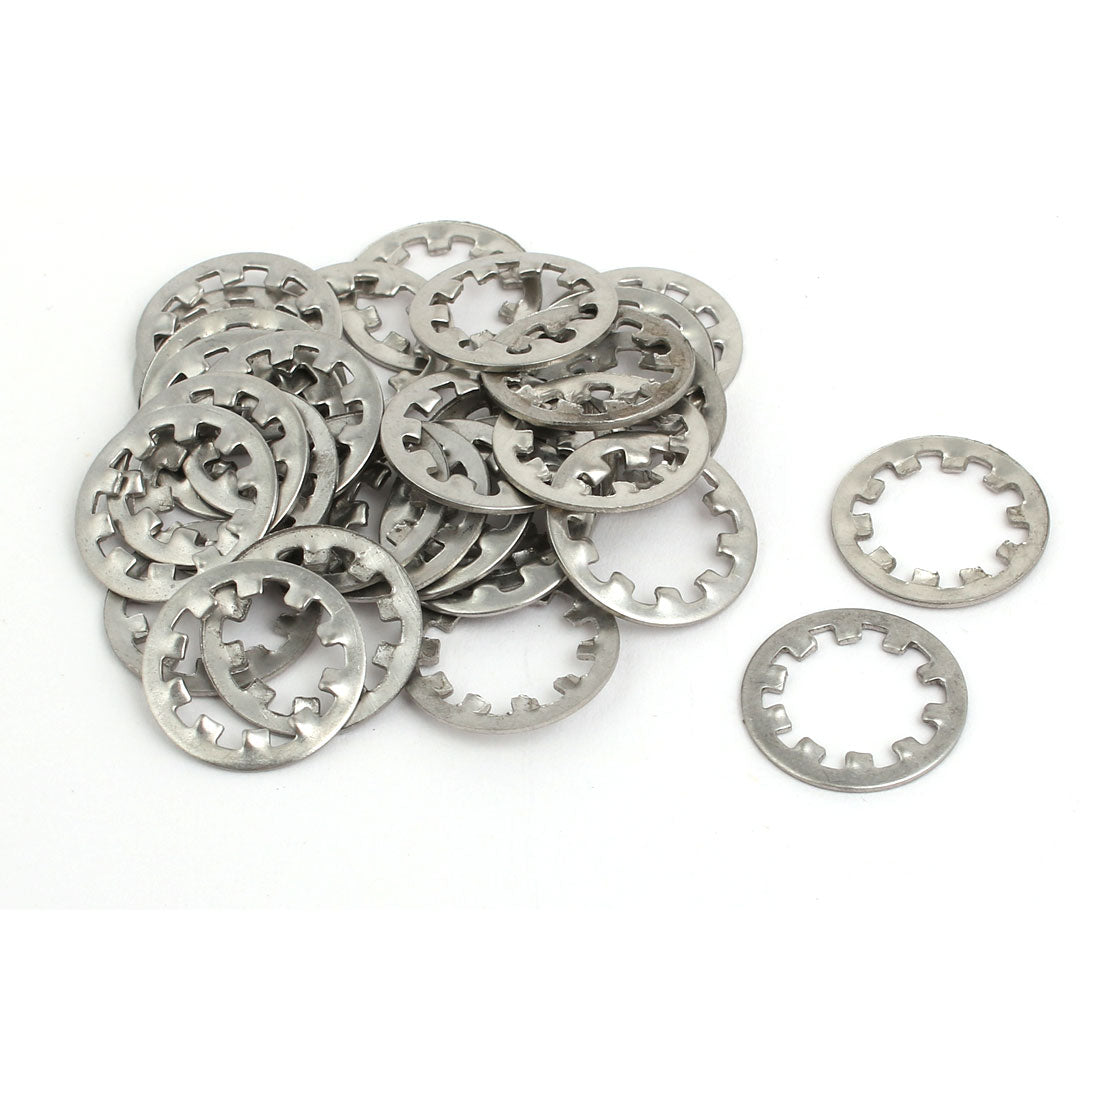 uxcell Uxcell 12mm Inner Dia Stainless Steel Internal Tooth Lock Washer Silver Tone 30pcs